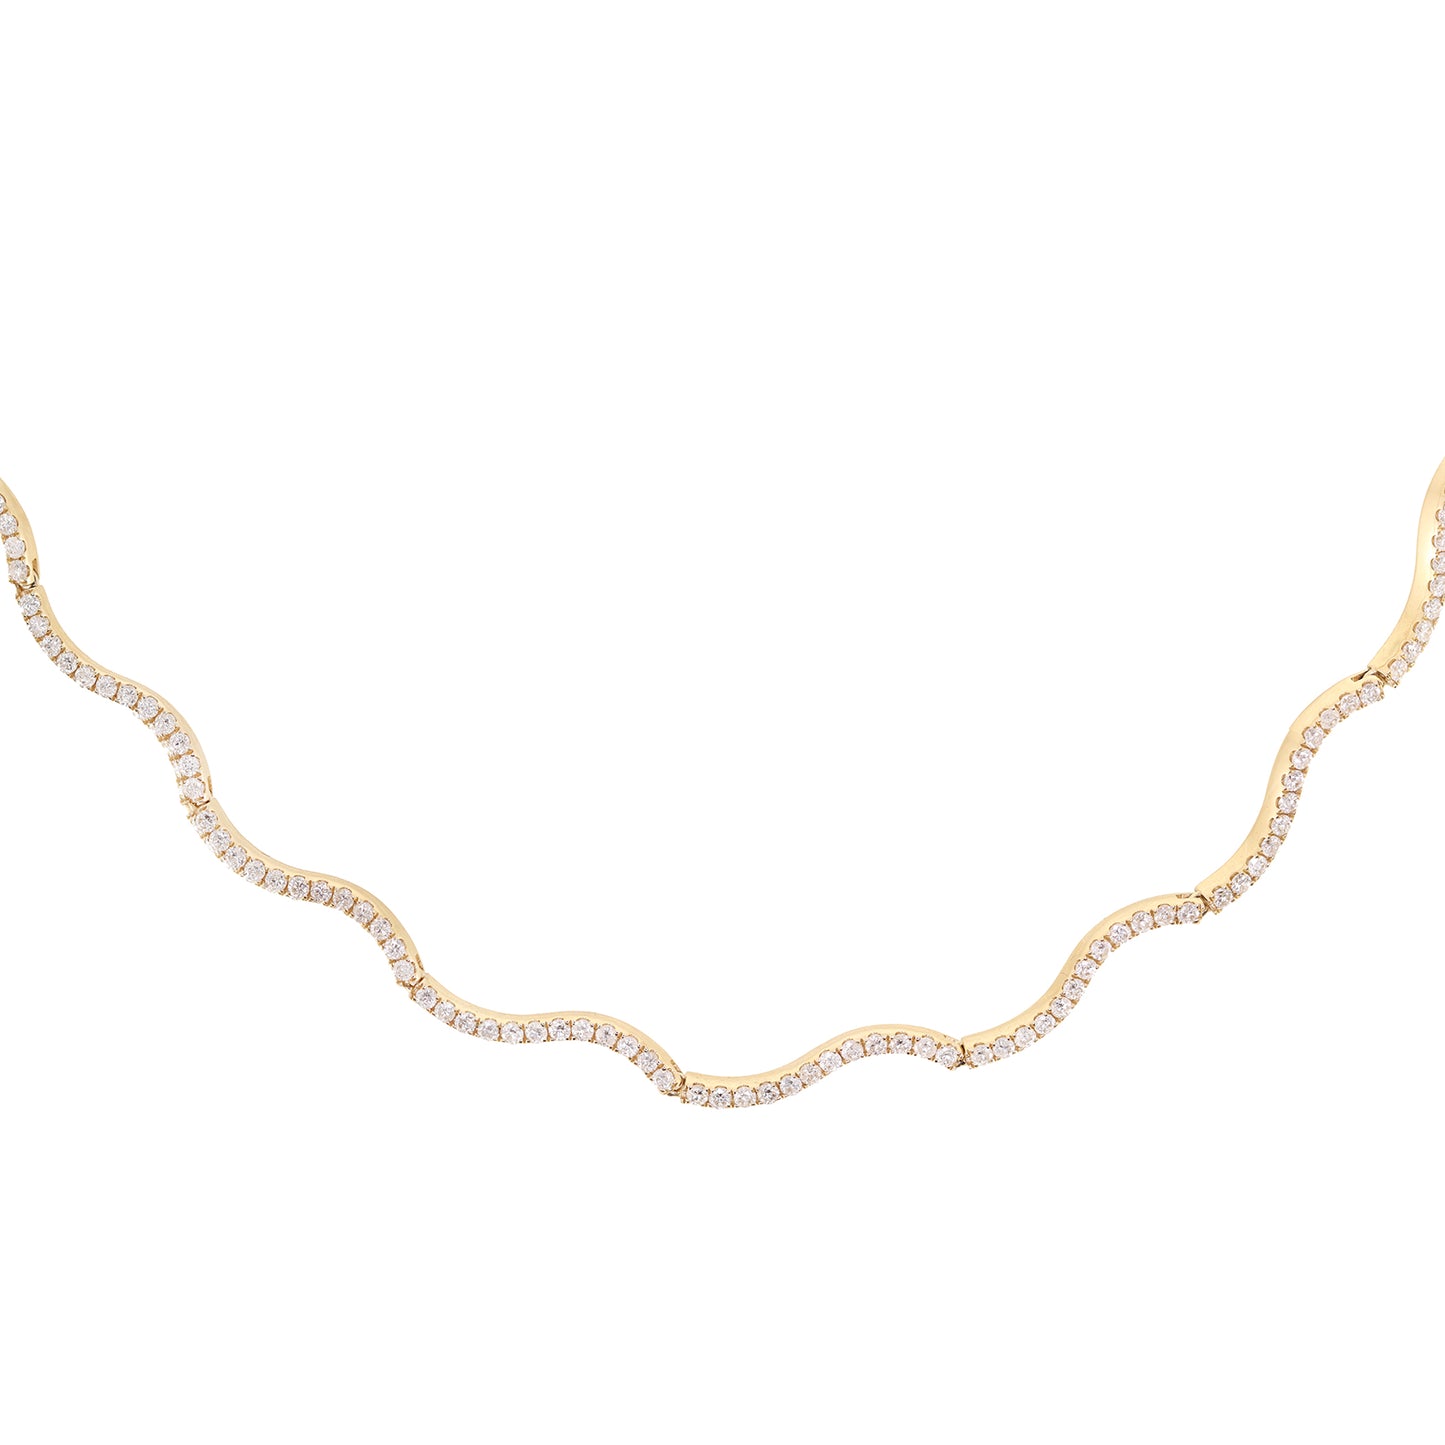 14kt gold and diamond wavy tennis necklace